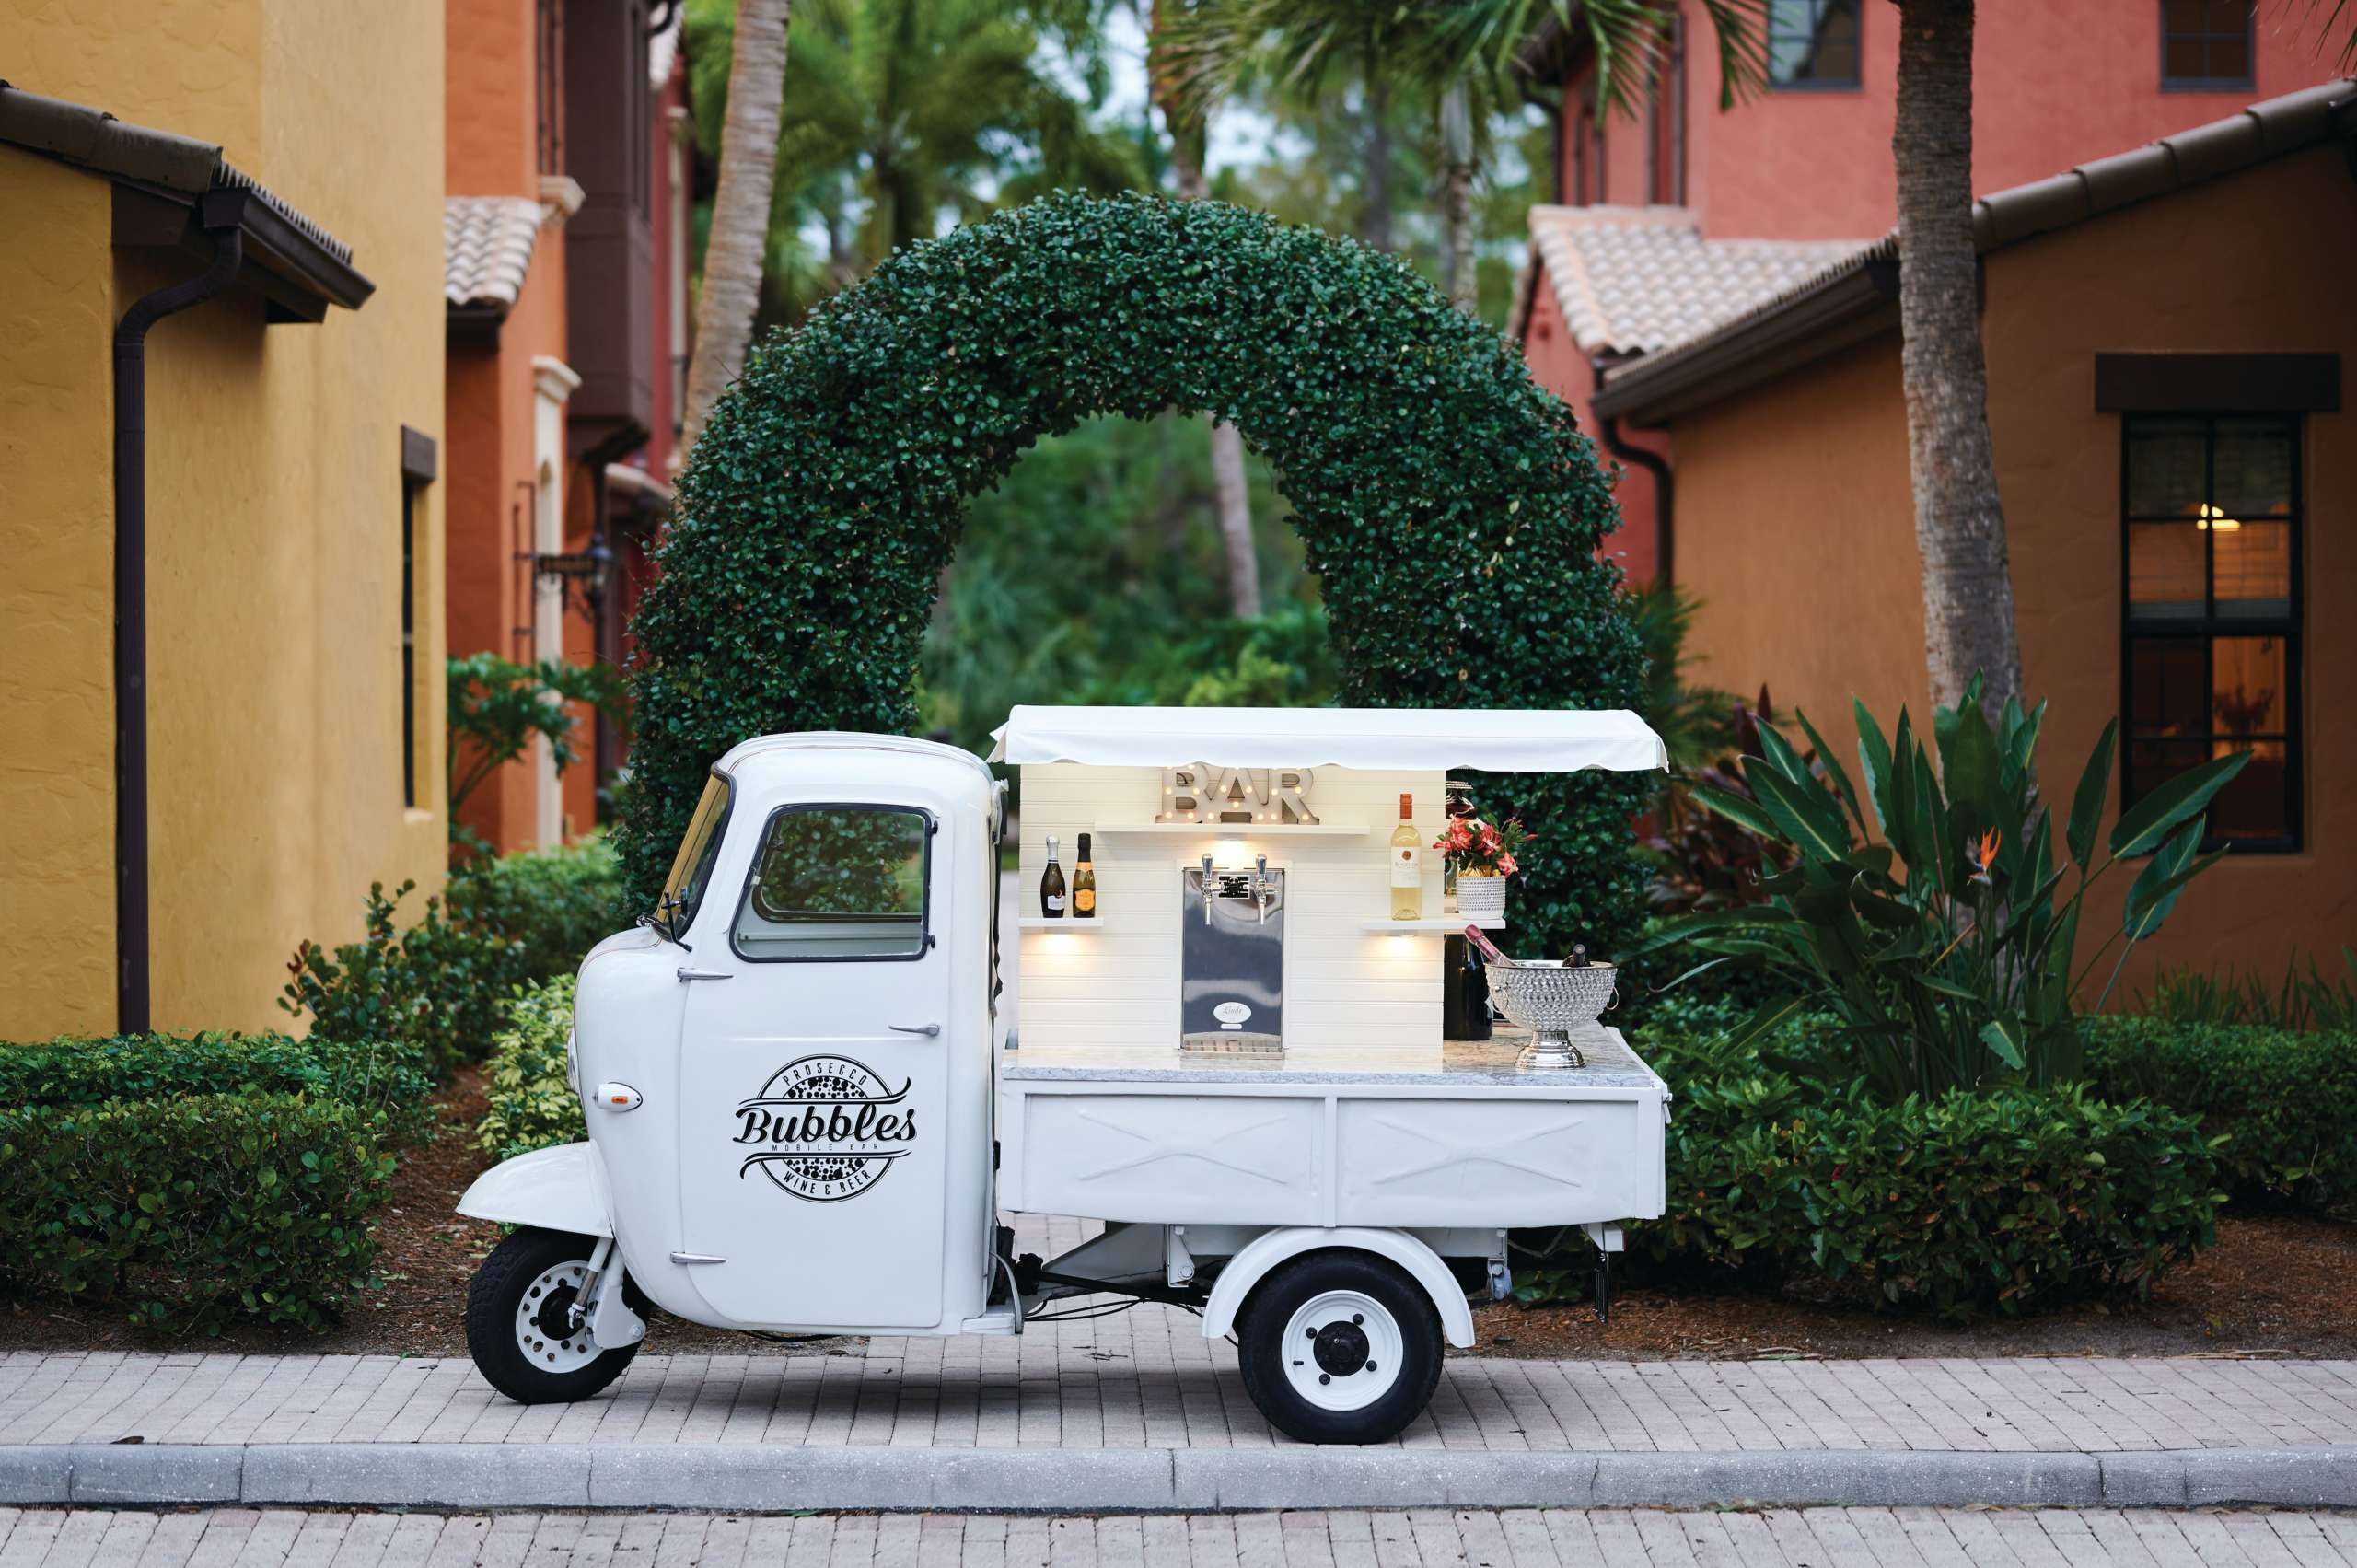 The memorable Bubbles Mobile Bar vehicles make special events such as weddings extra special.